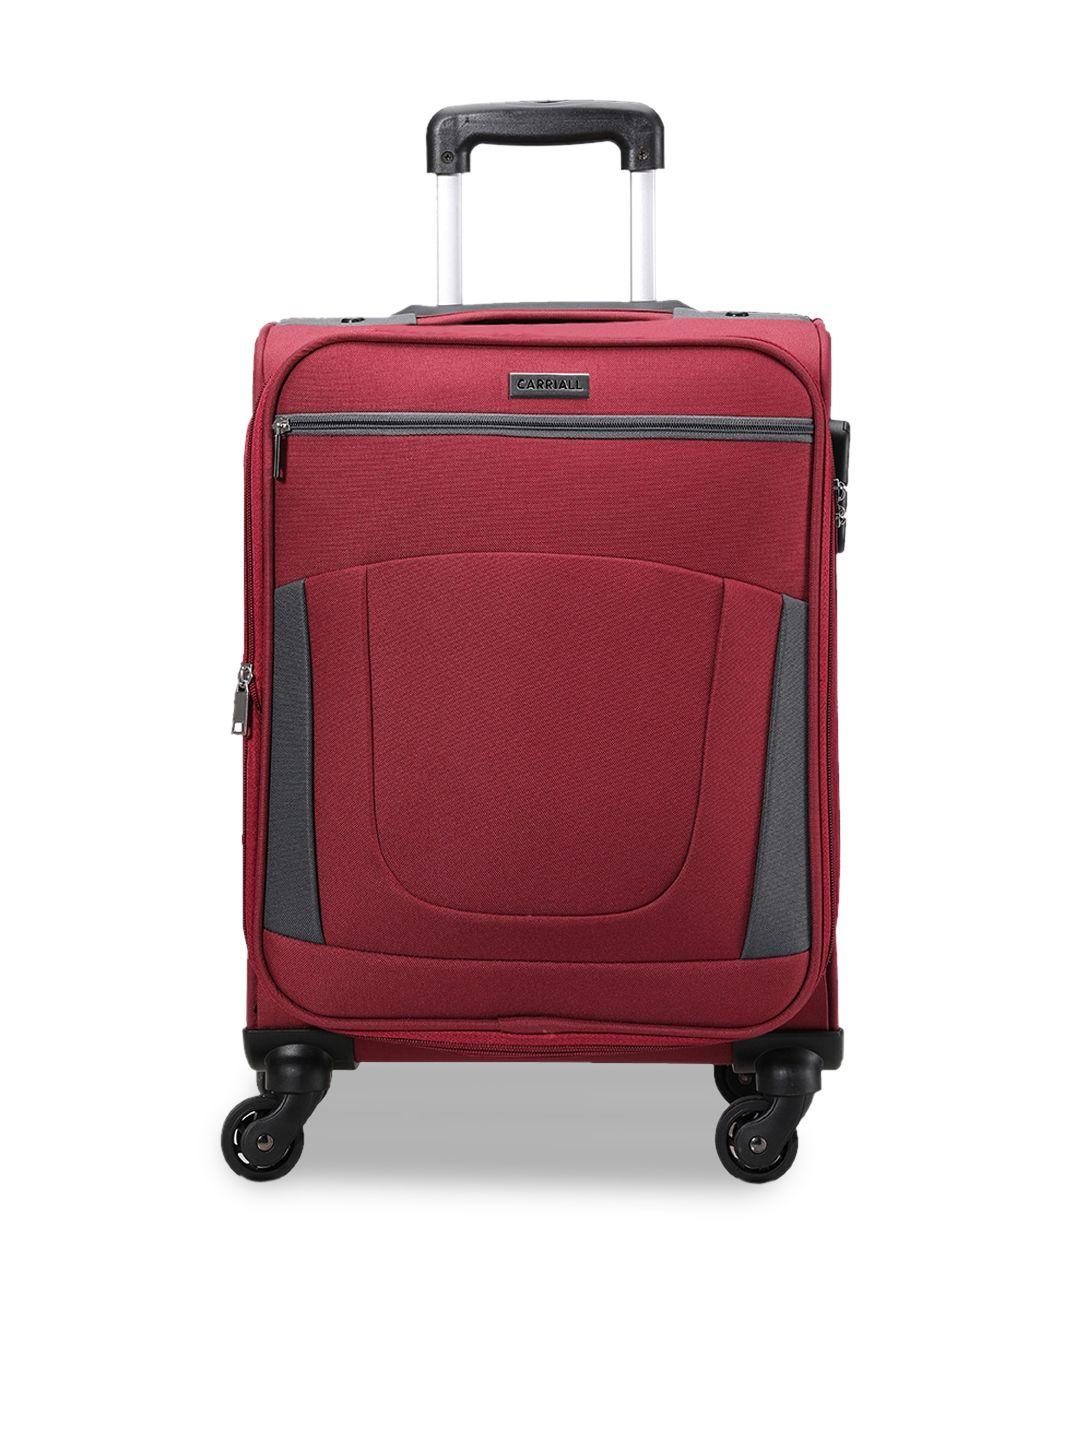 carriall red solid cabin soft luggage trolley suitcase